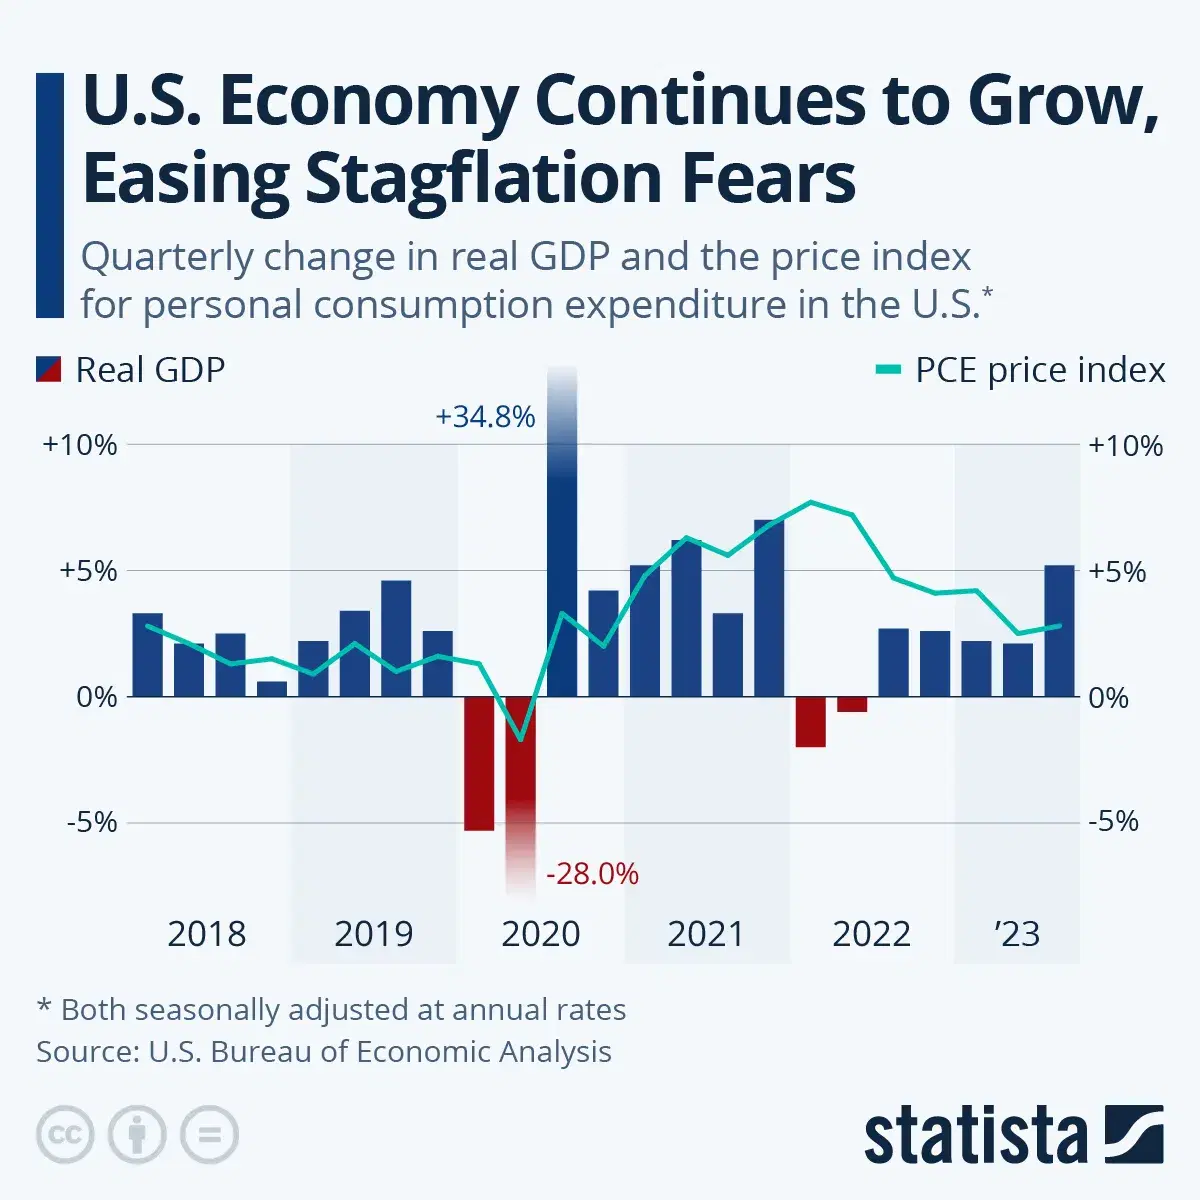 U.S. Economy Continues to Grow, Easing Stagflation Fears